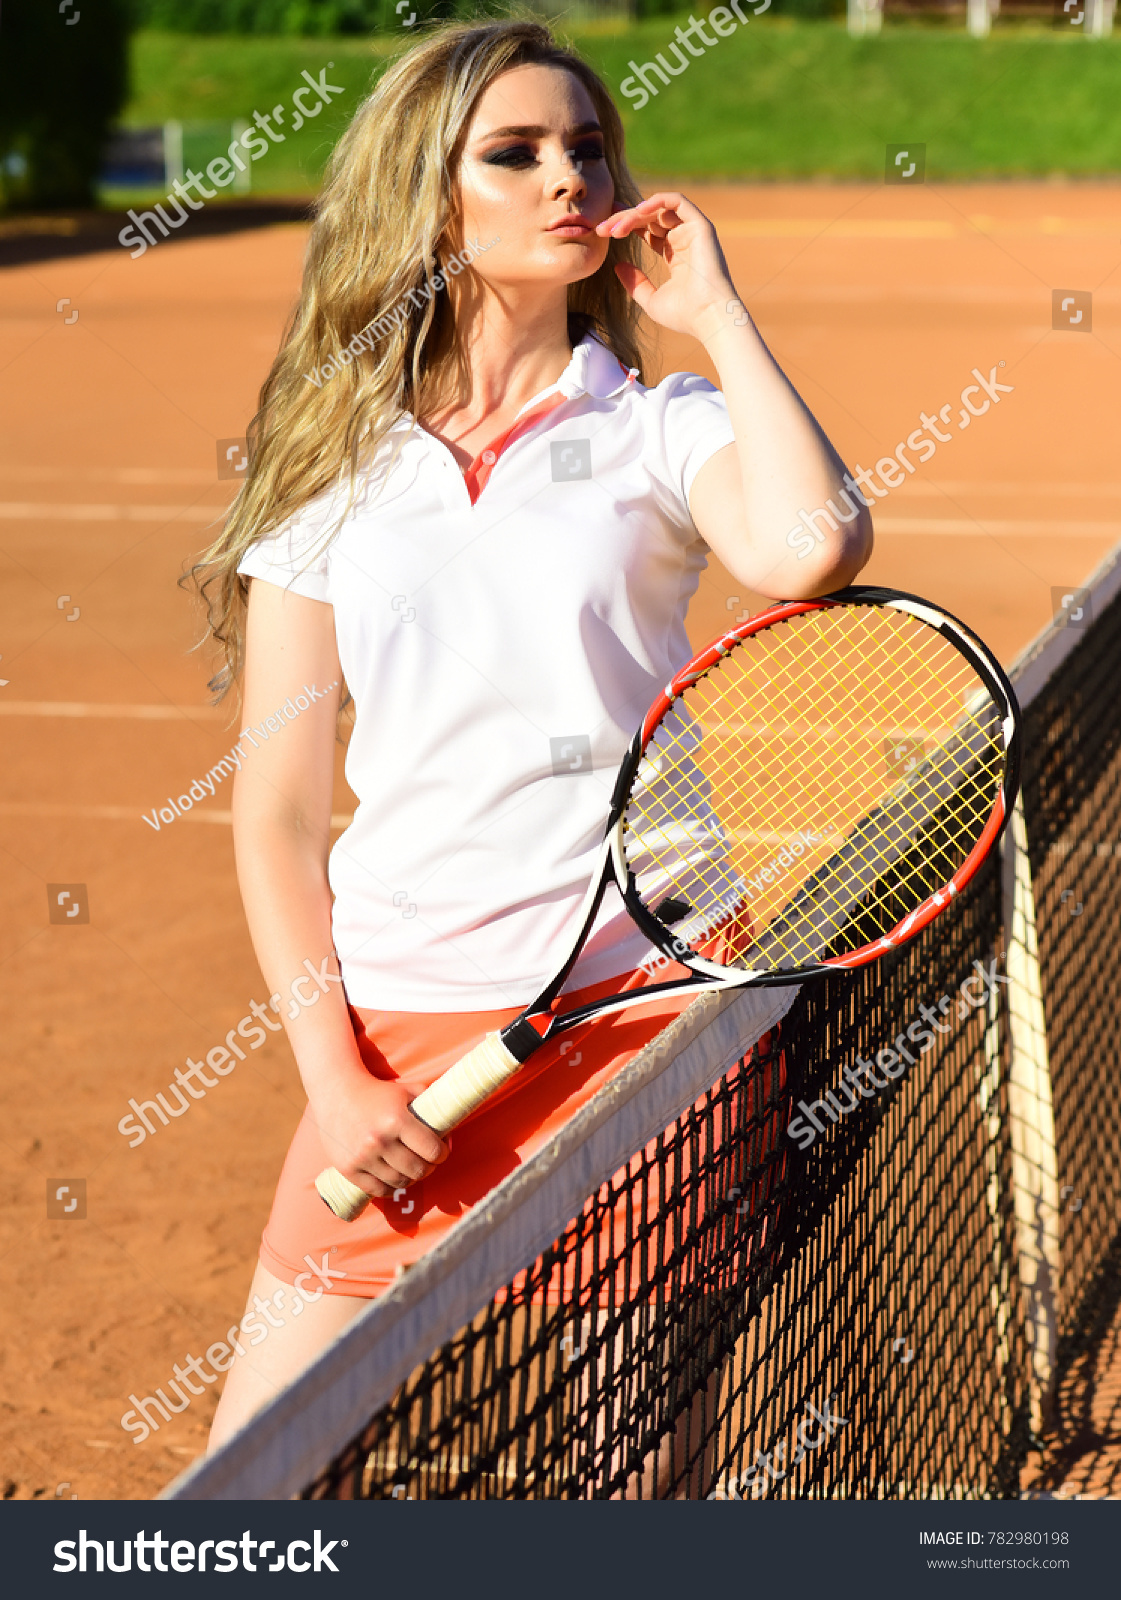 tennis player outfit girl